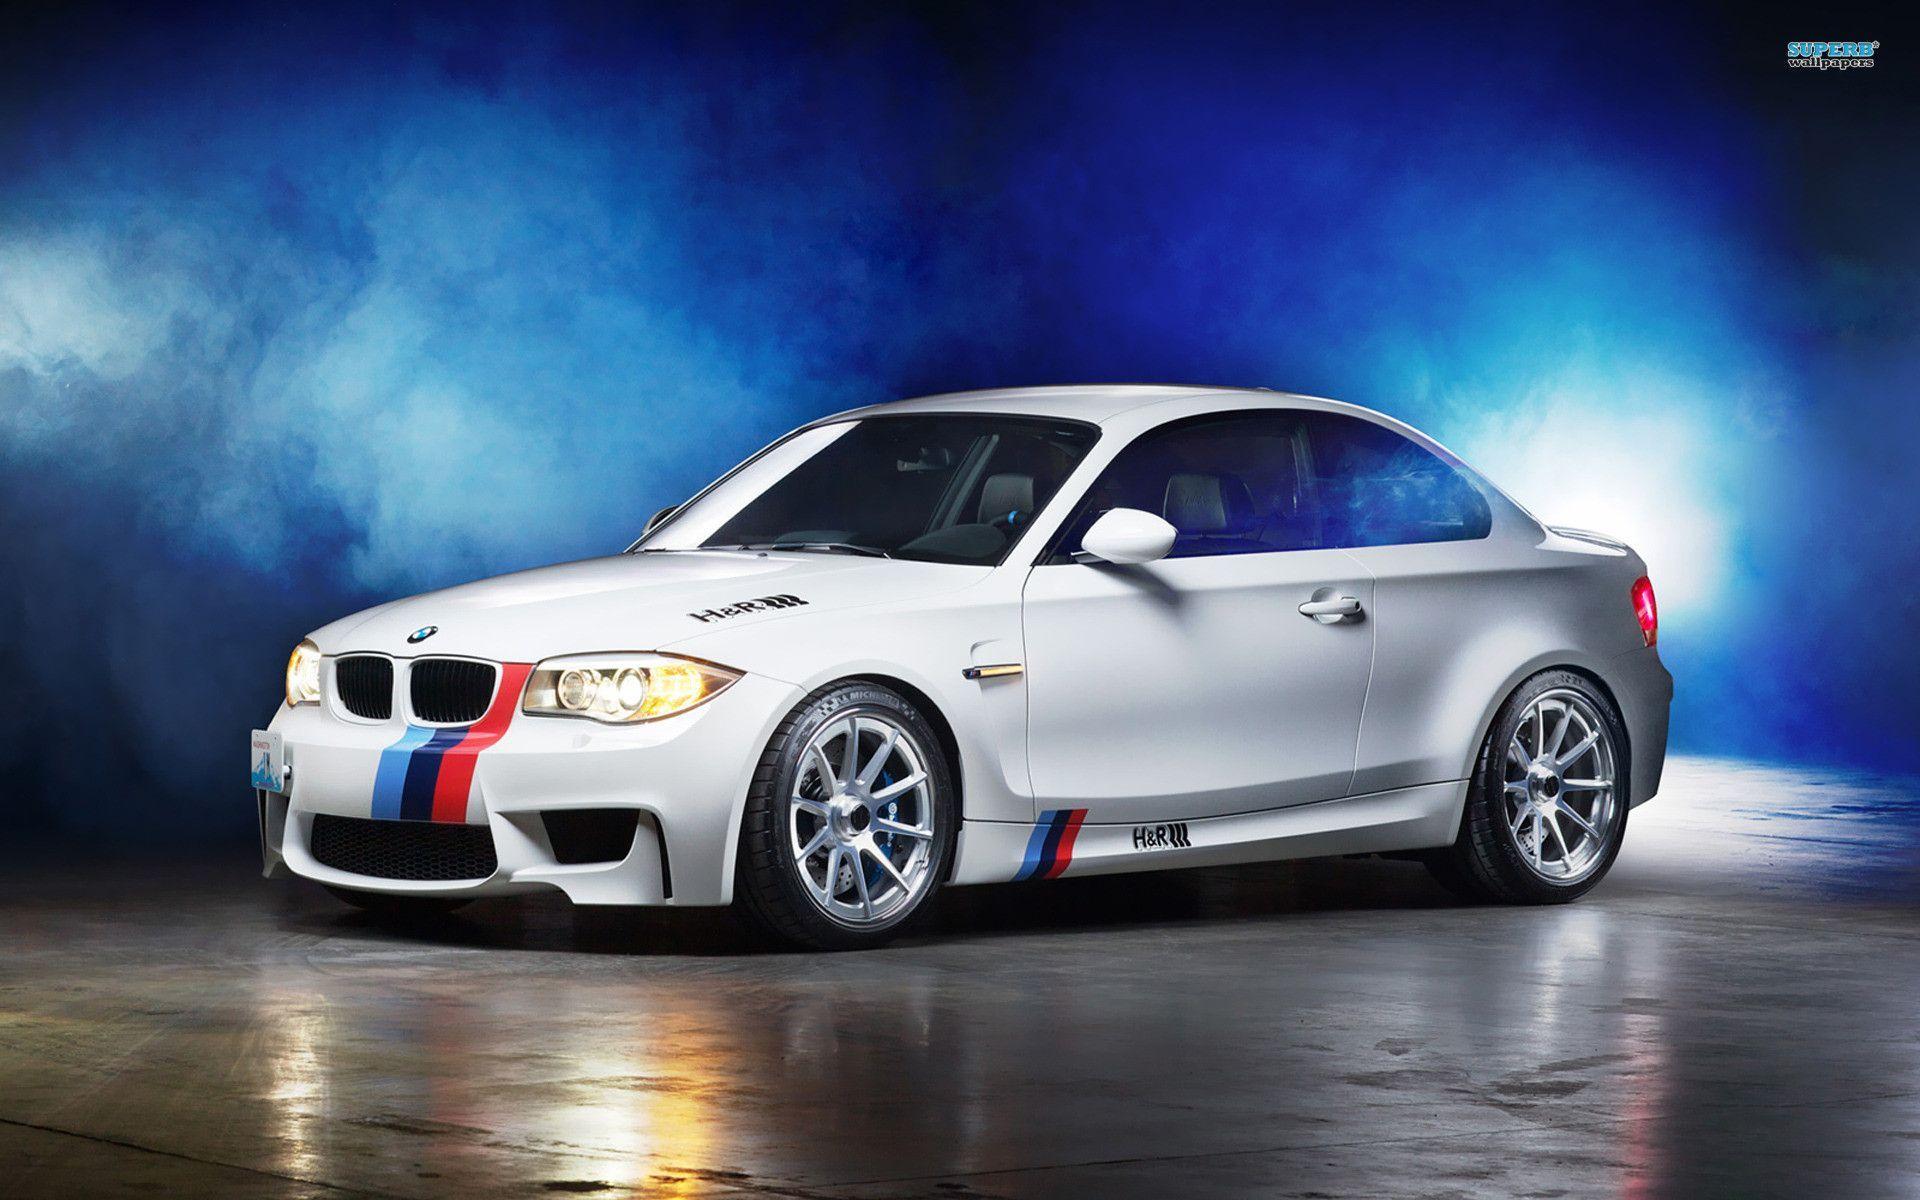 H&R BMW 1M Coupe Project Vehicle wallpaper wallpaper - #